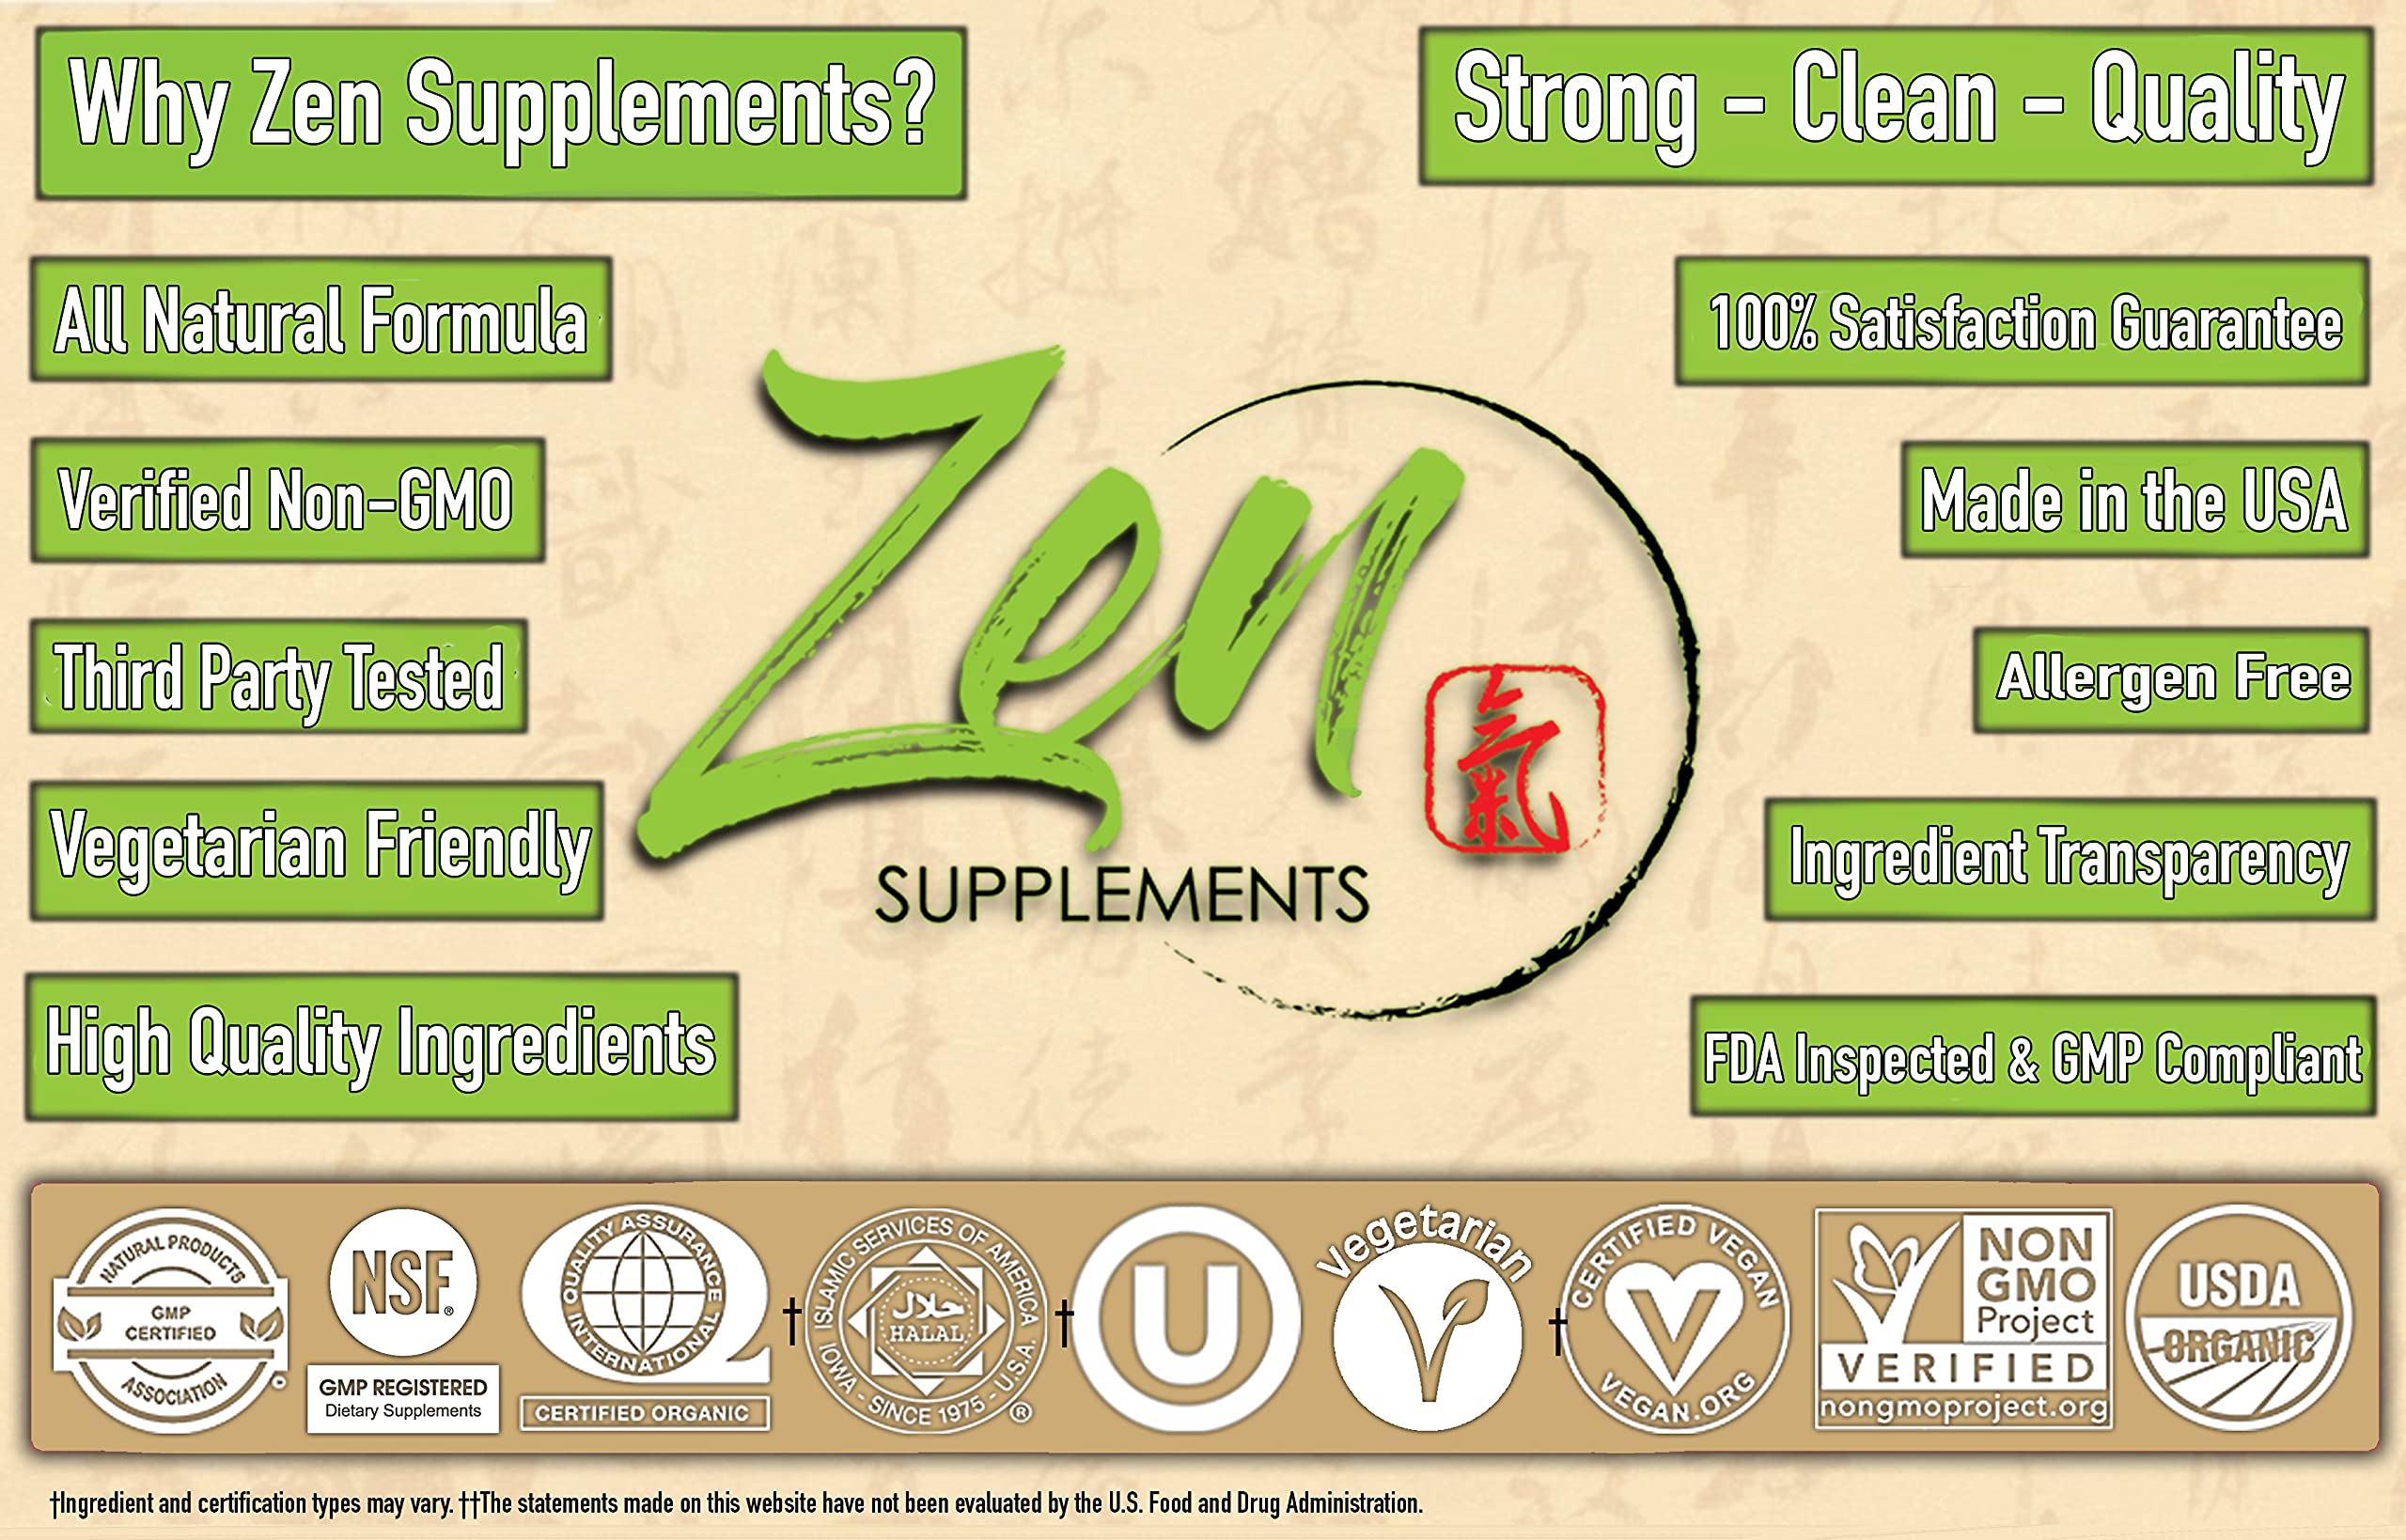 Zen Supplements - Active Woman’s Multi-Vitamin 90-Tabs - Women's Multivitamin & Multimineral with Botanicals & Herbs - Supports Immune Health & Sexual Wellness